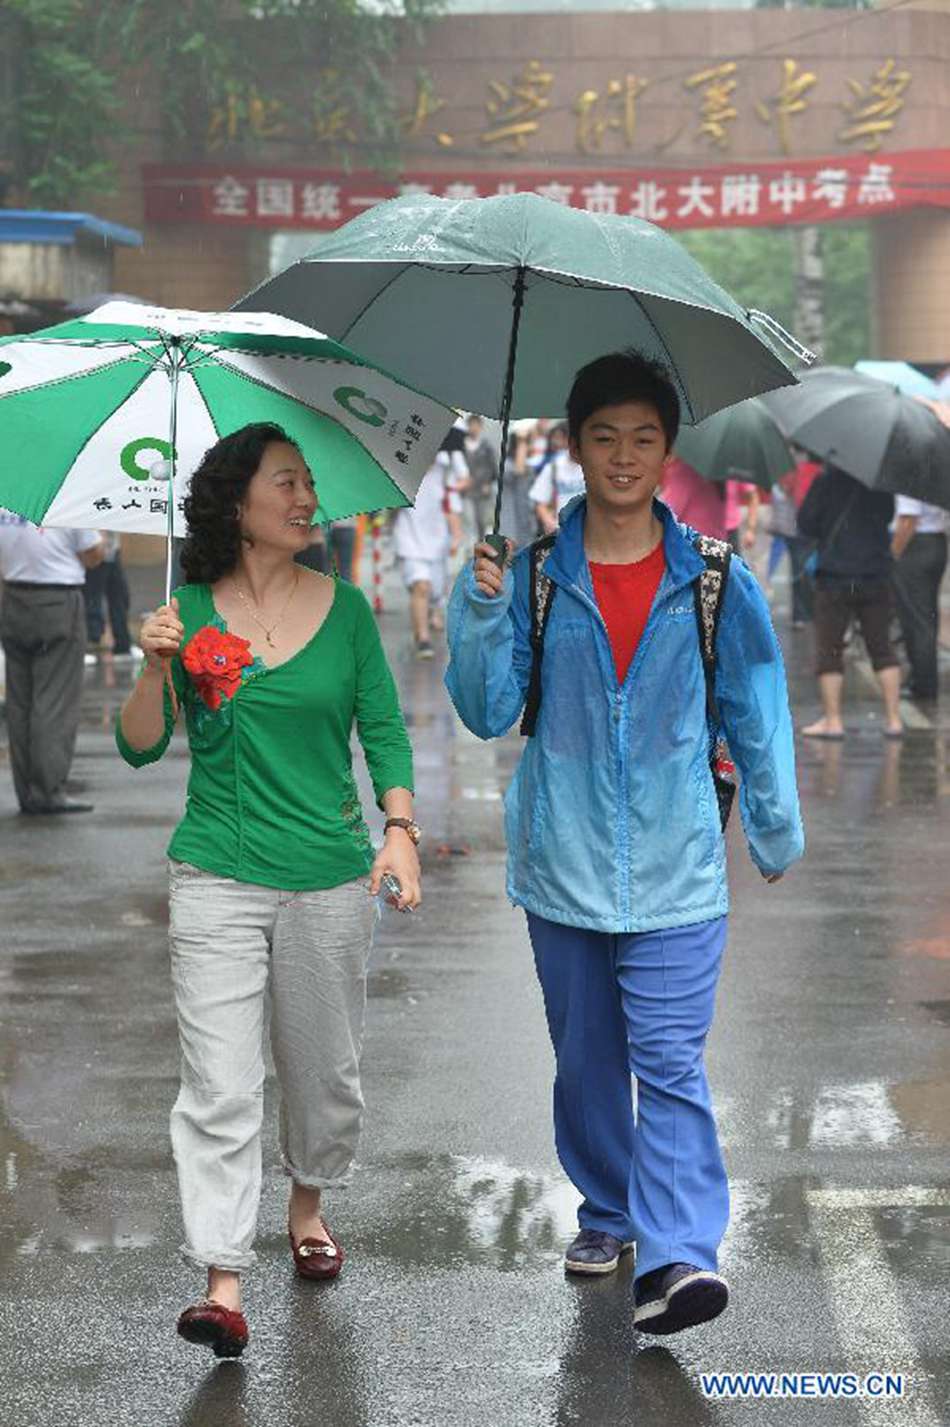 An examinee of the national college entrance exam and his mother leave the exam site at the Affiliated High School of Peking University in Beijing, capital of China, June 7, 2013. Some 9.12 million applicants are expected to sit this year's college entrance exam on June 7 and 8. 